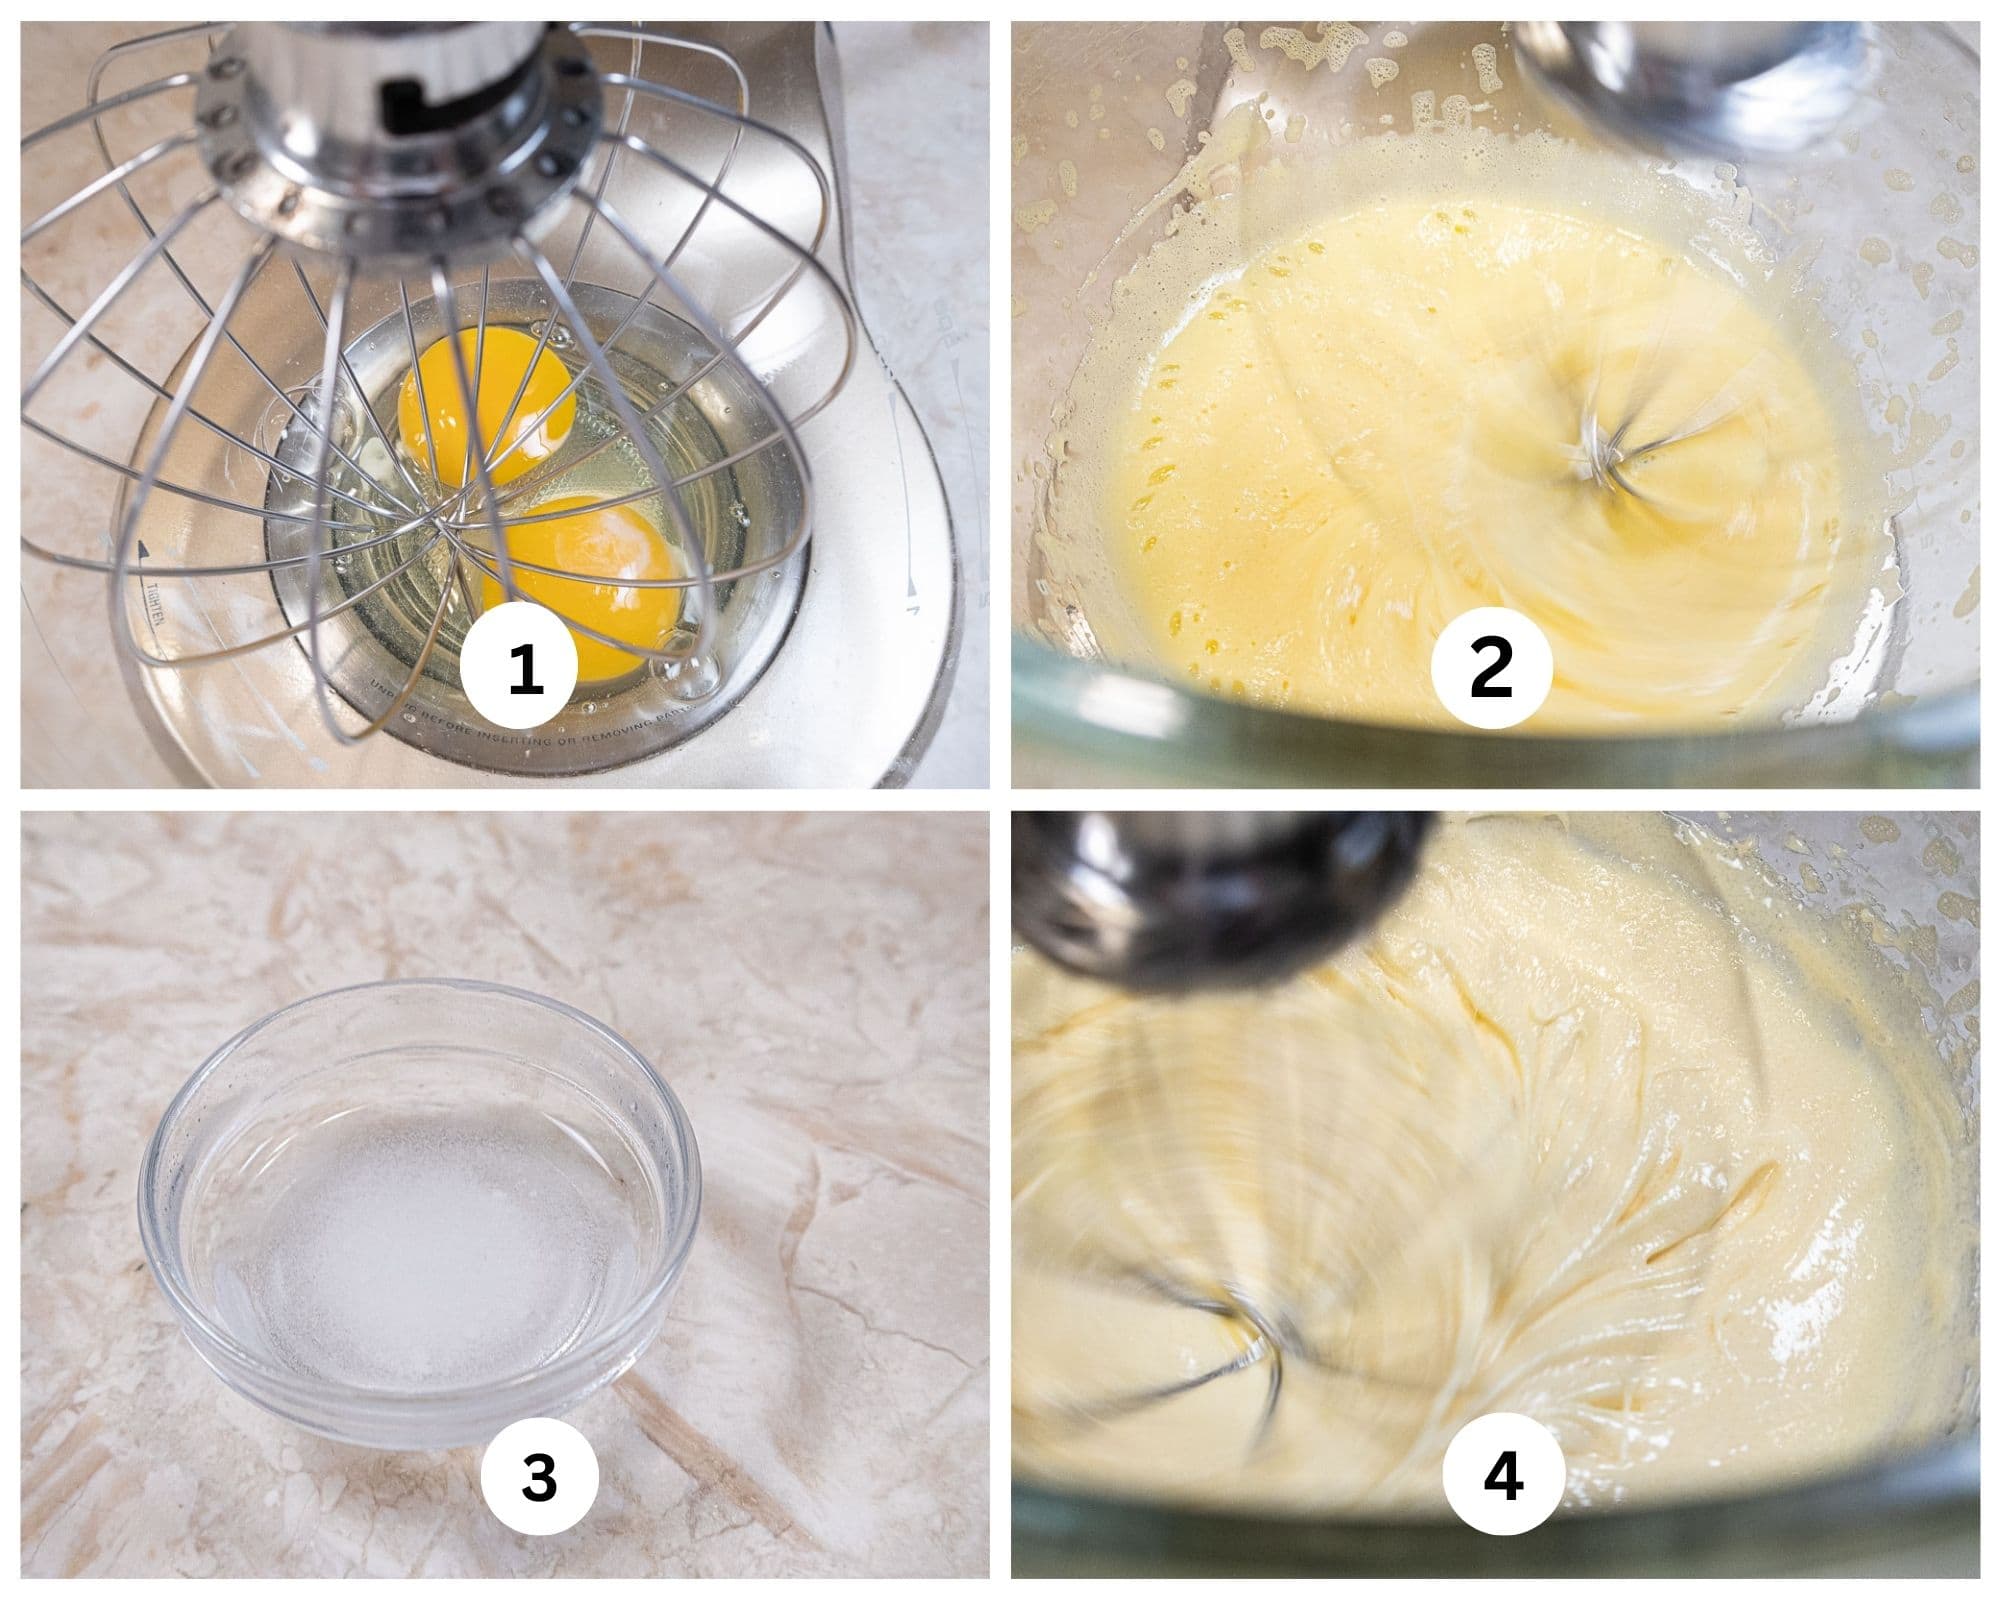 The first collage for Springerle shows the eggs in the mixing bowl, the eggs beaten, the ammonia and anise extract mixed and the the egg mixture beaten.